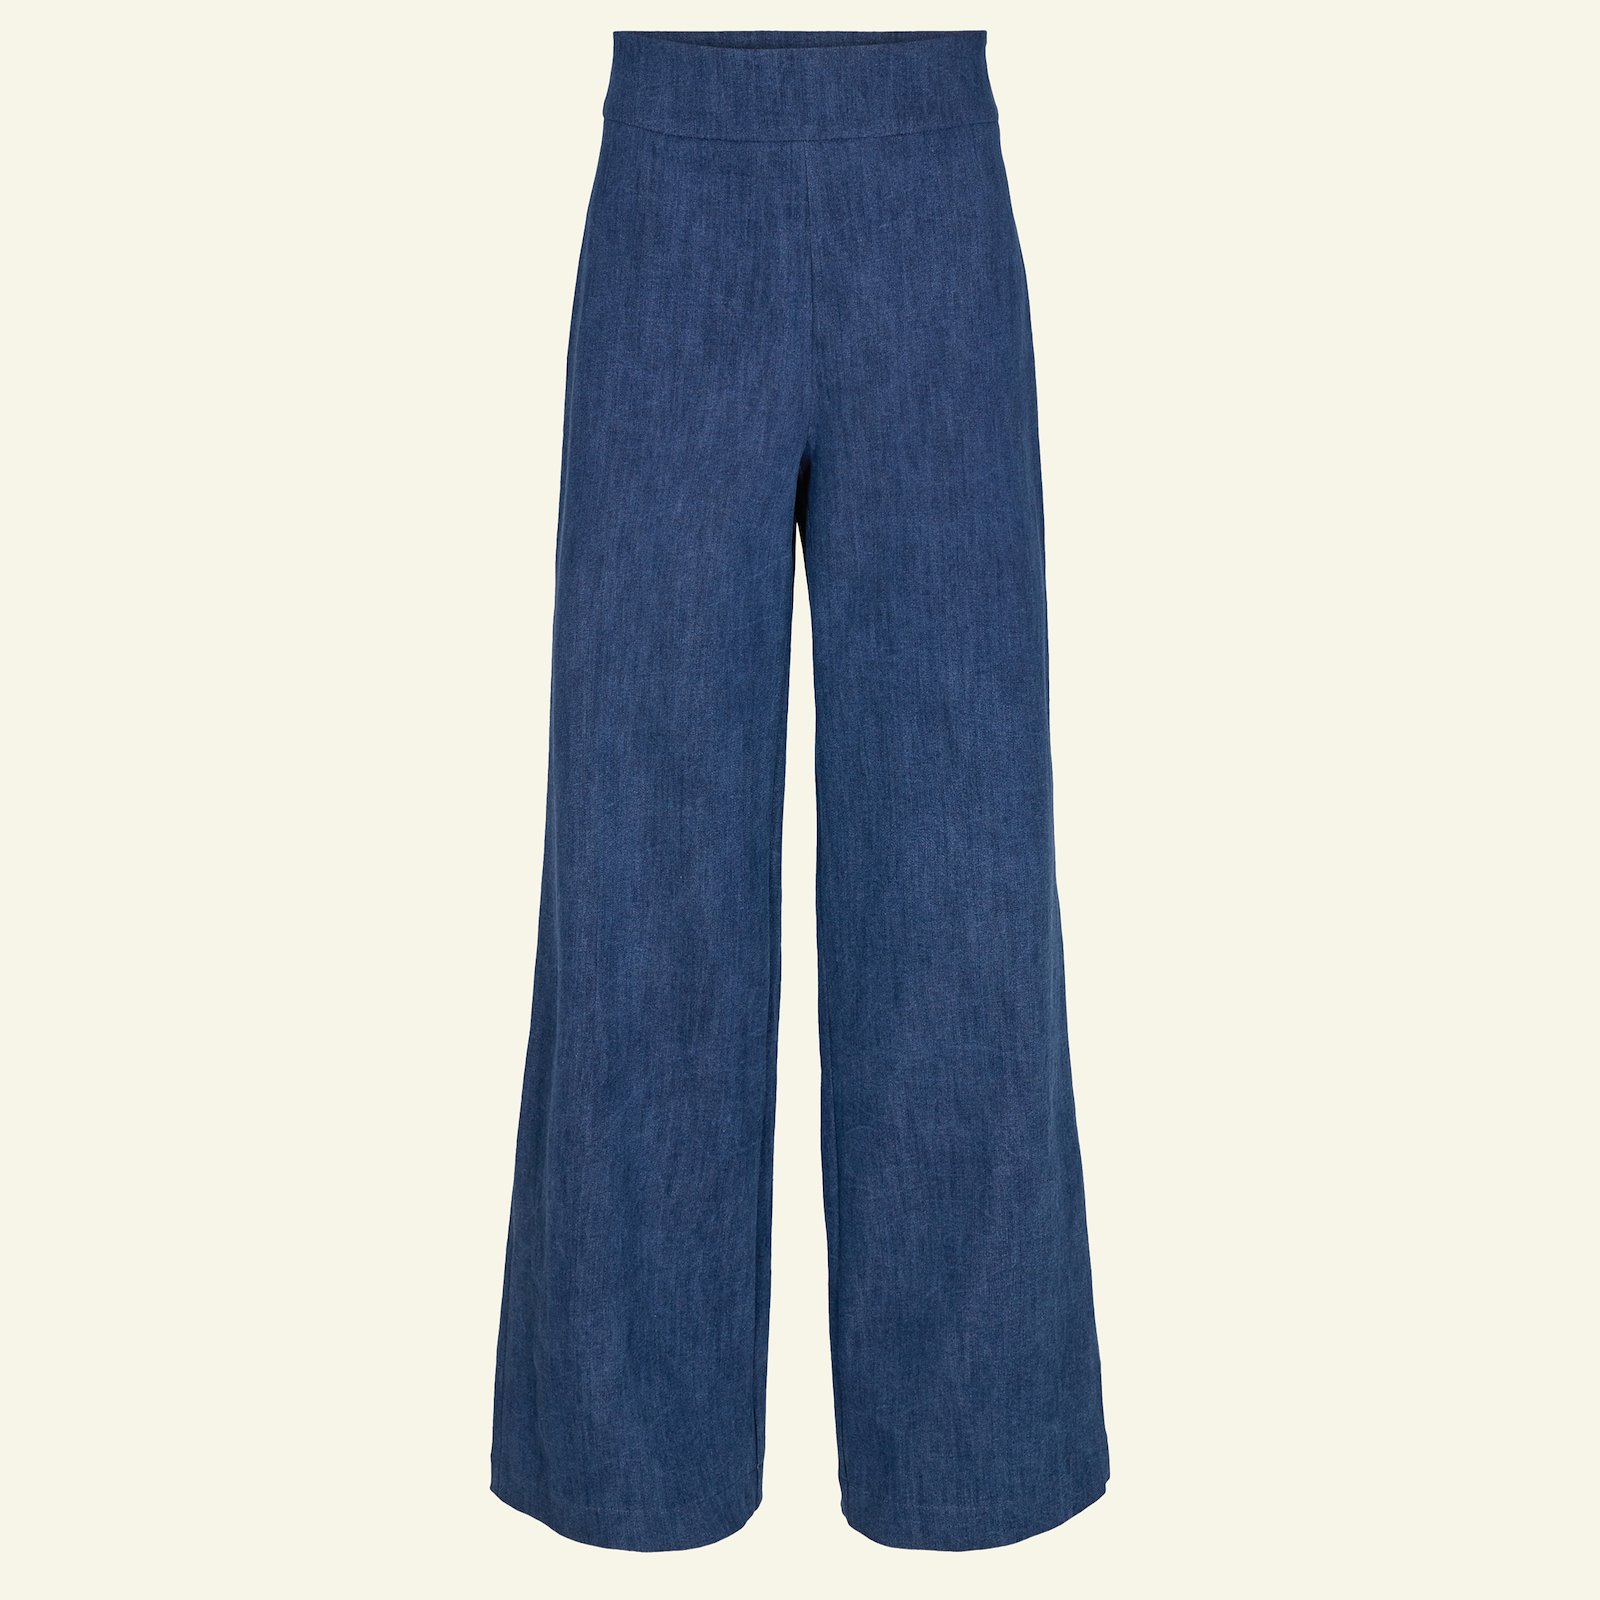 Highwaist and wide legs trousers, 32/4 p20052_460851_sskit